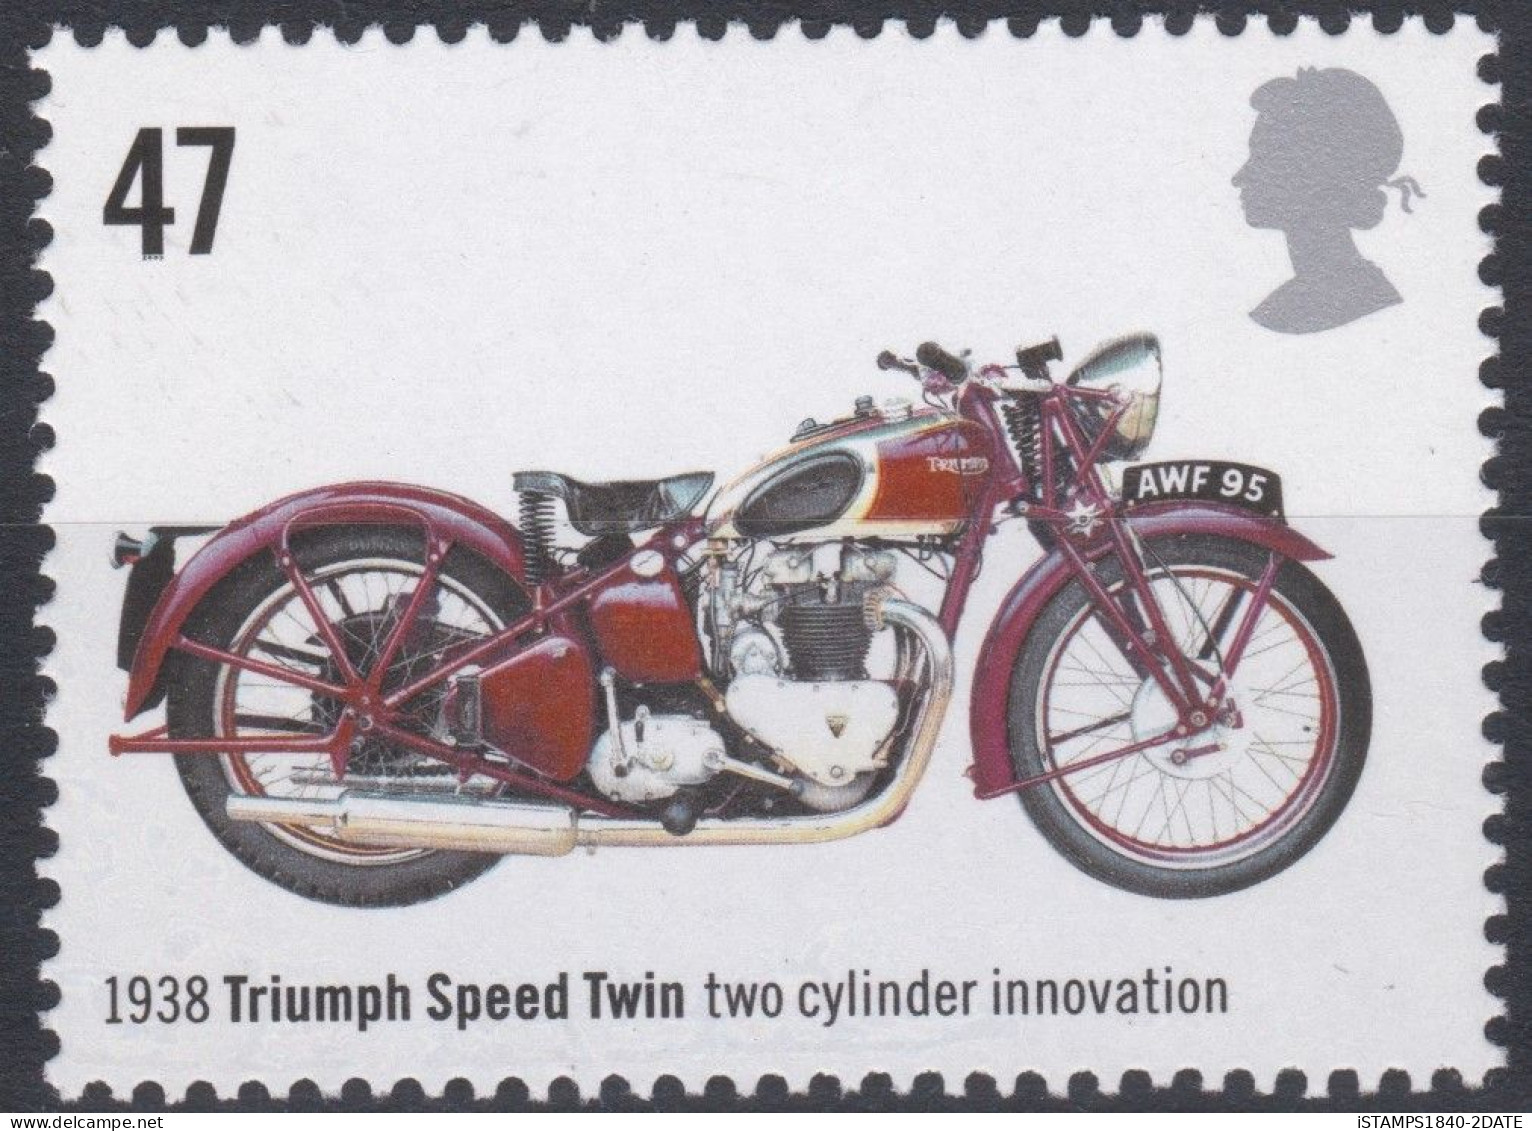 00863/Great Britain 2005 Sg2551 47p Multicoloured MNH Triumph Speed Twin, Two Cylinder Innovation (1938) - Motos